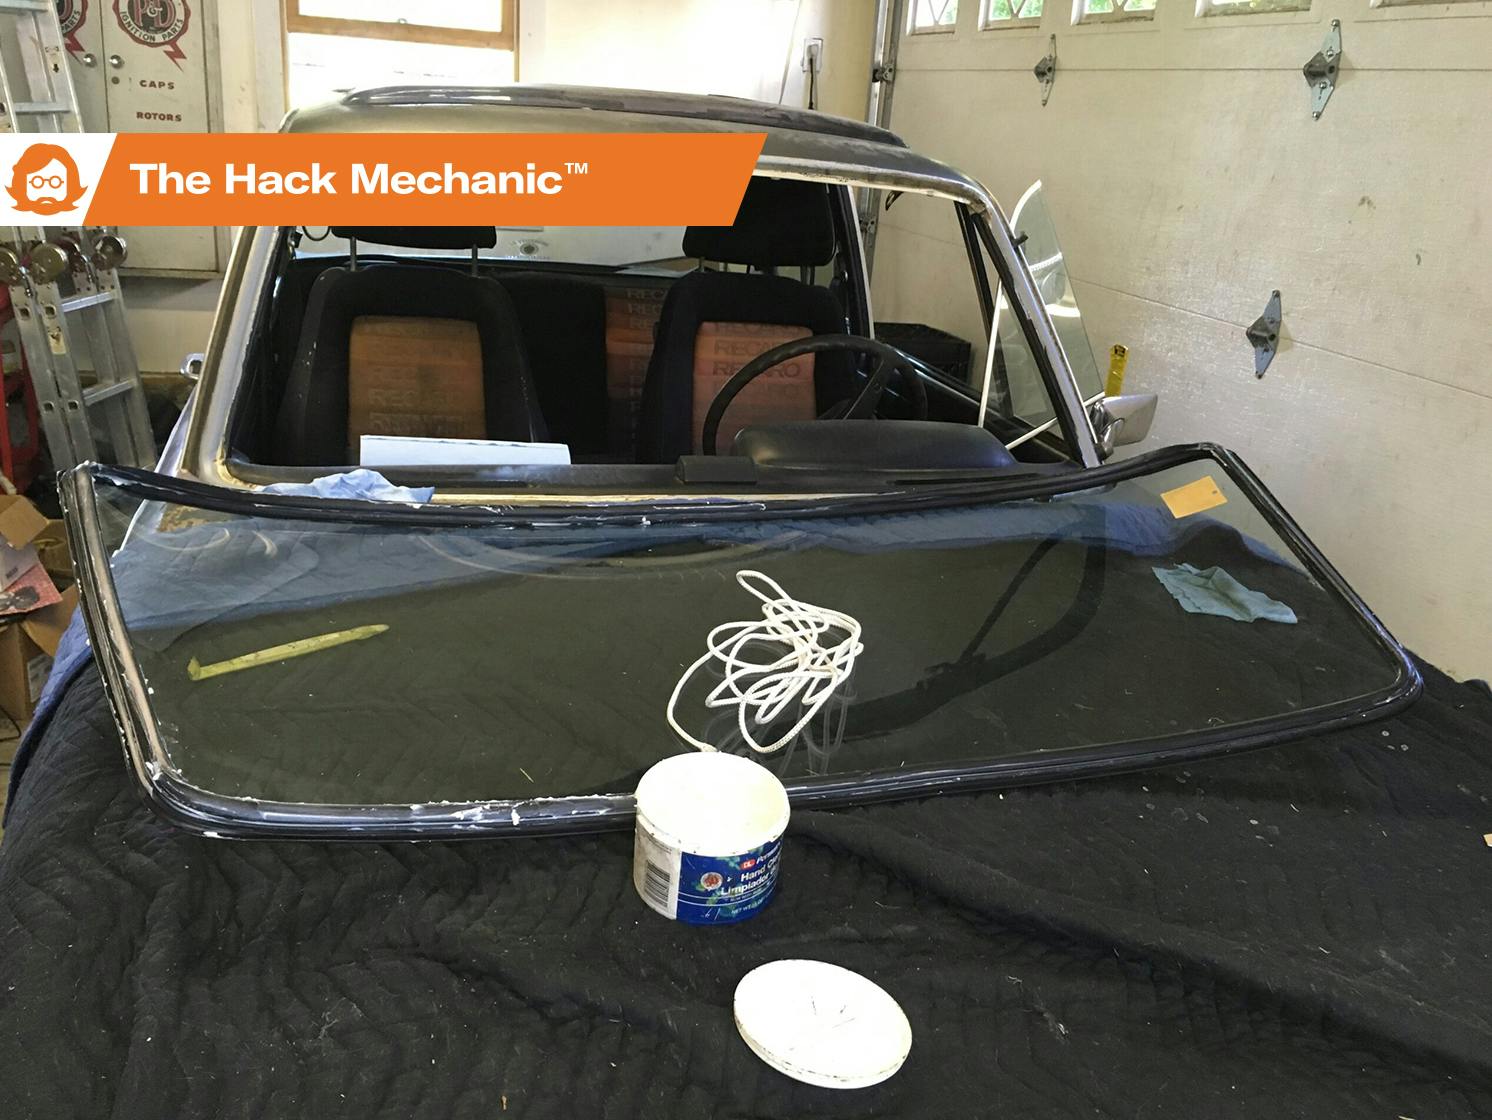 How To Clean the Inside of a Car Windshield - Classic Car Maintenance